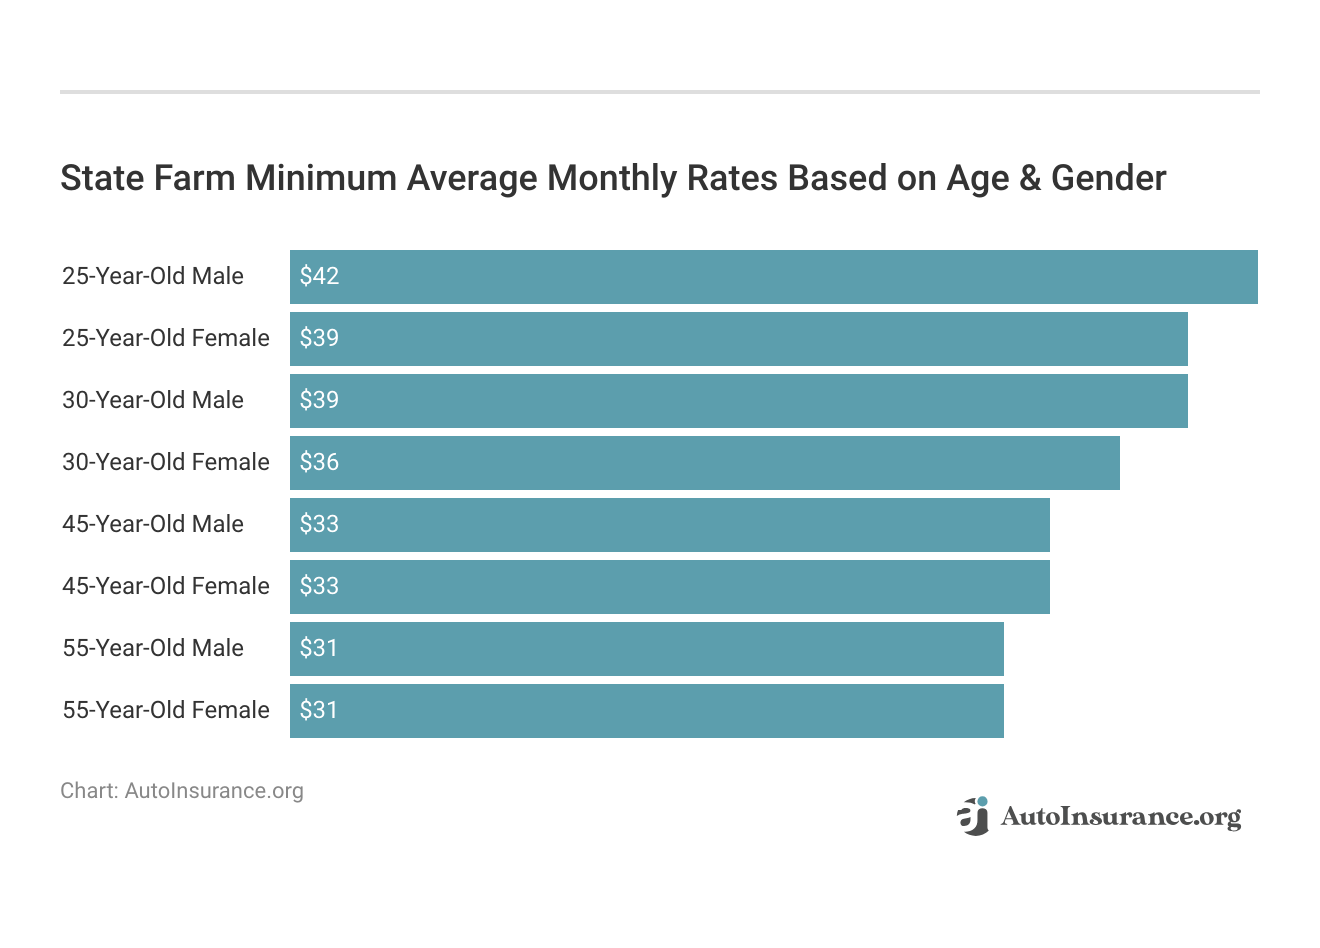 <h3>State Farm Minimum Average Monthly Rates Based on Age & Gender</h3>